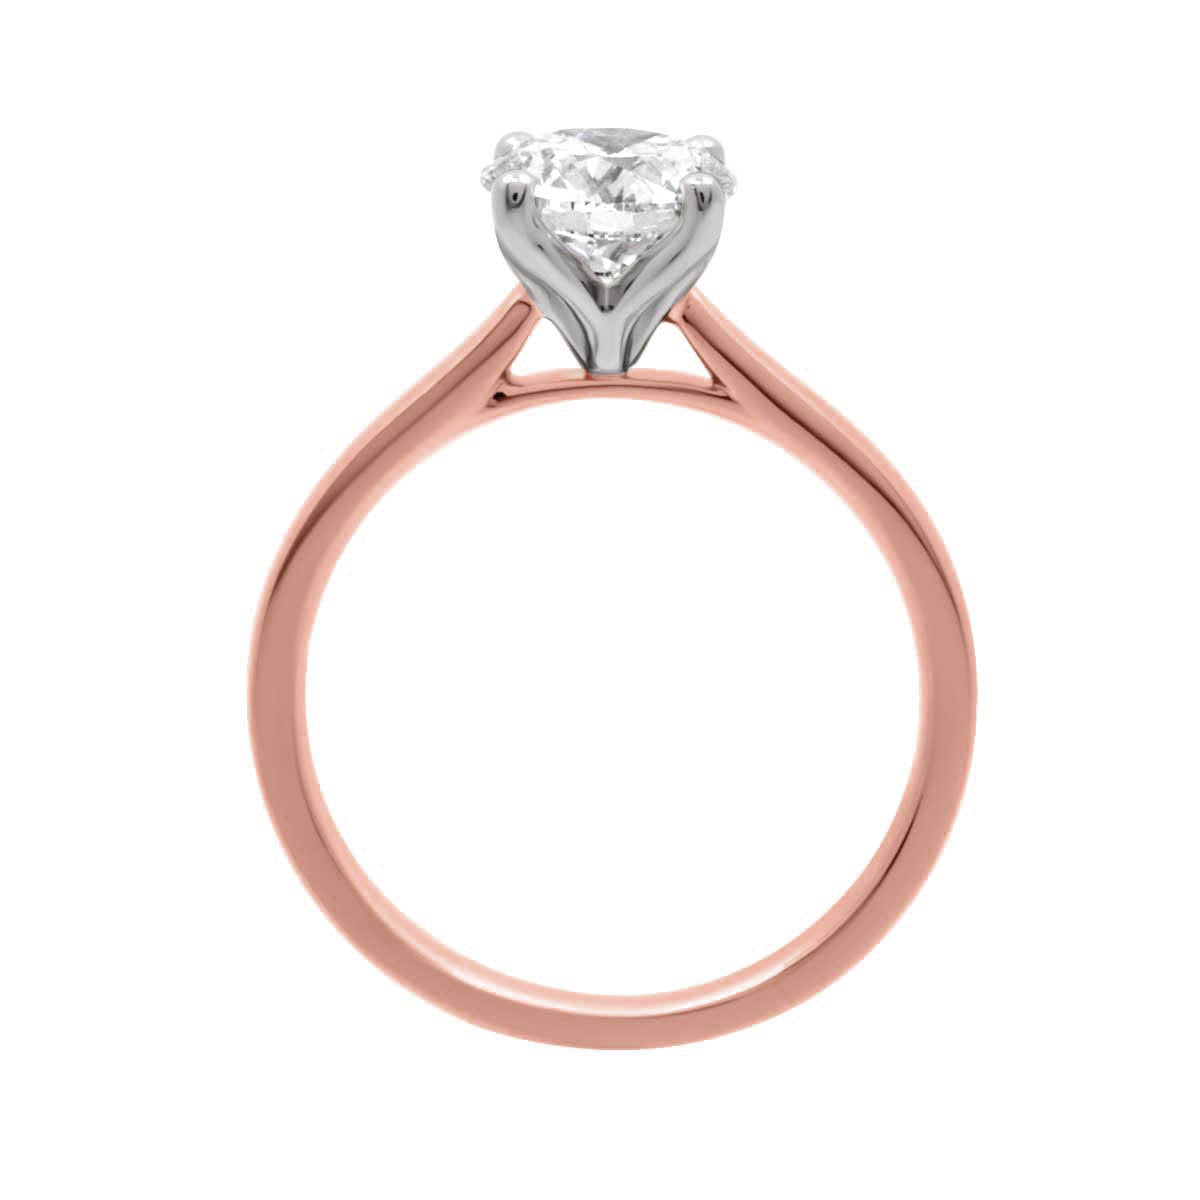 Tulip Setting Solitaire Engagement Ring In rose gold and White Gold standing upright